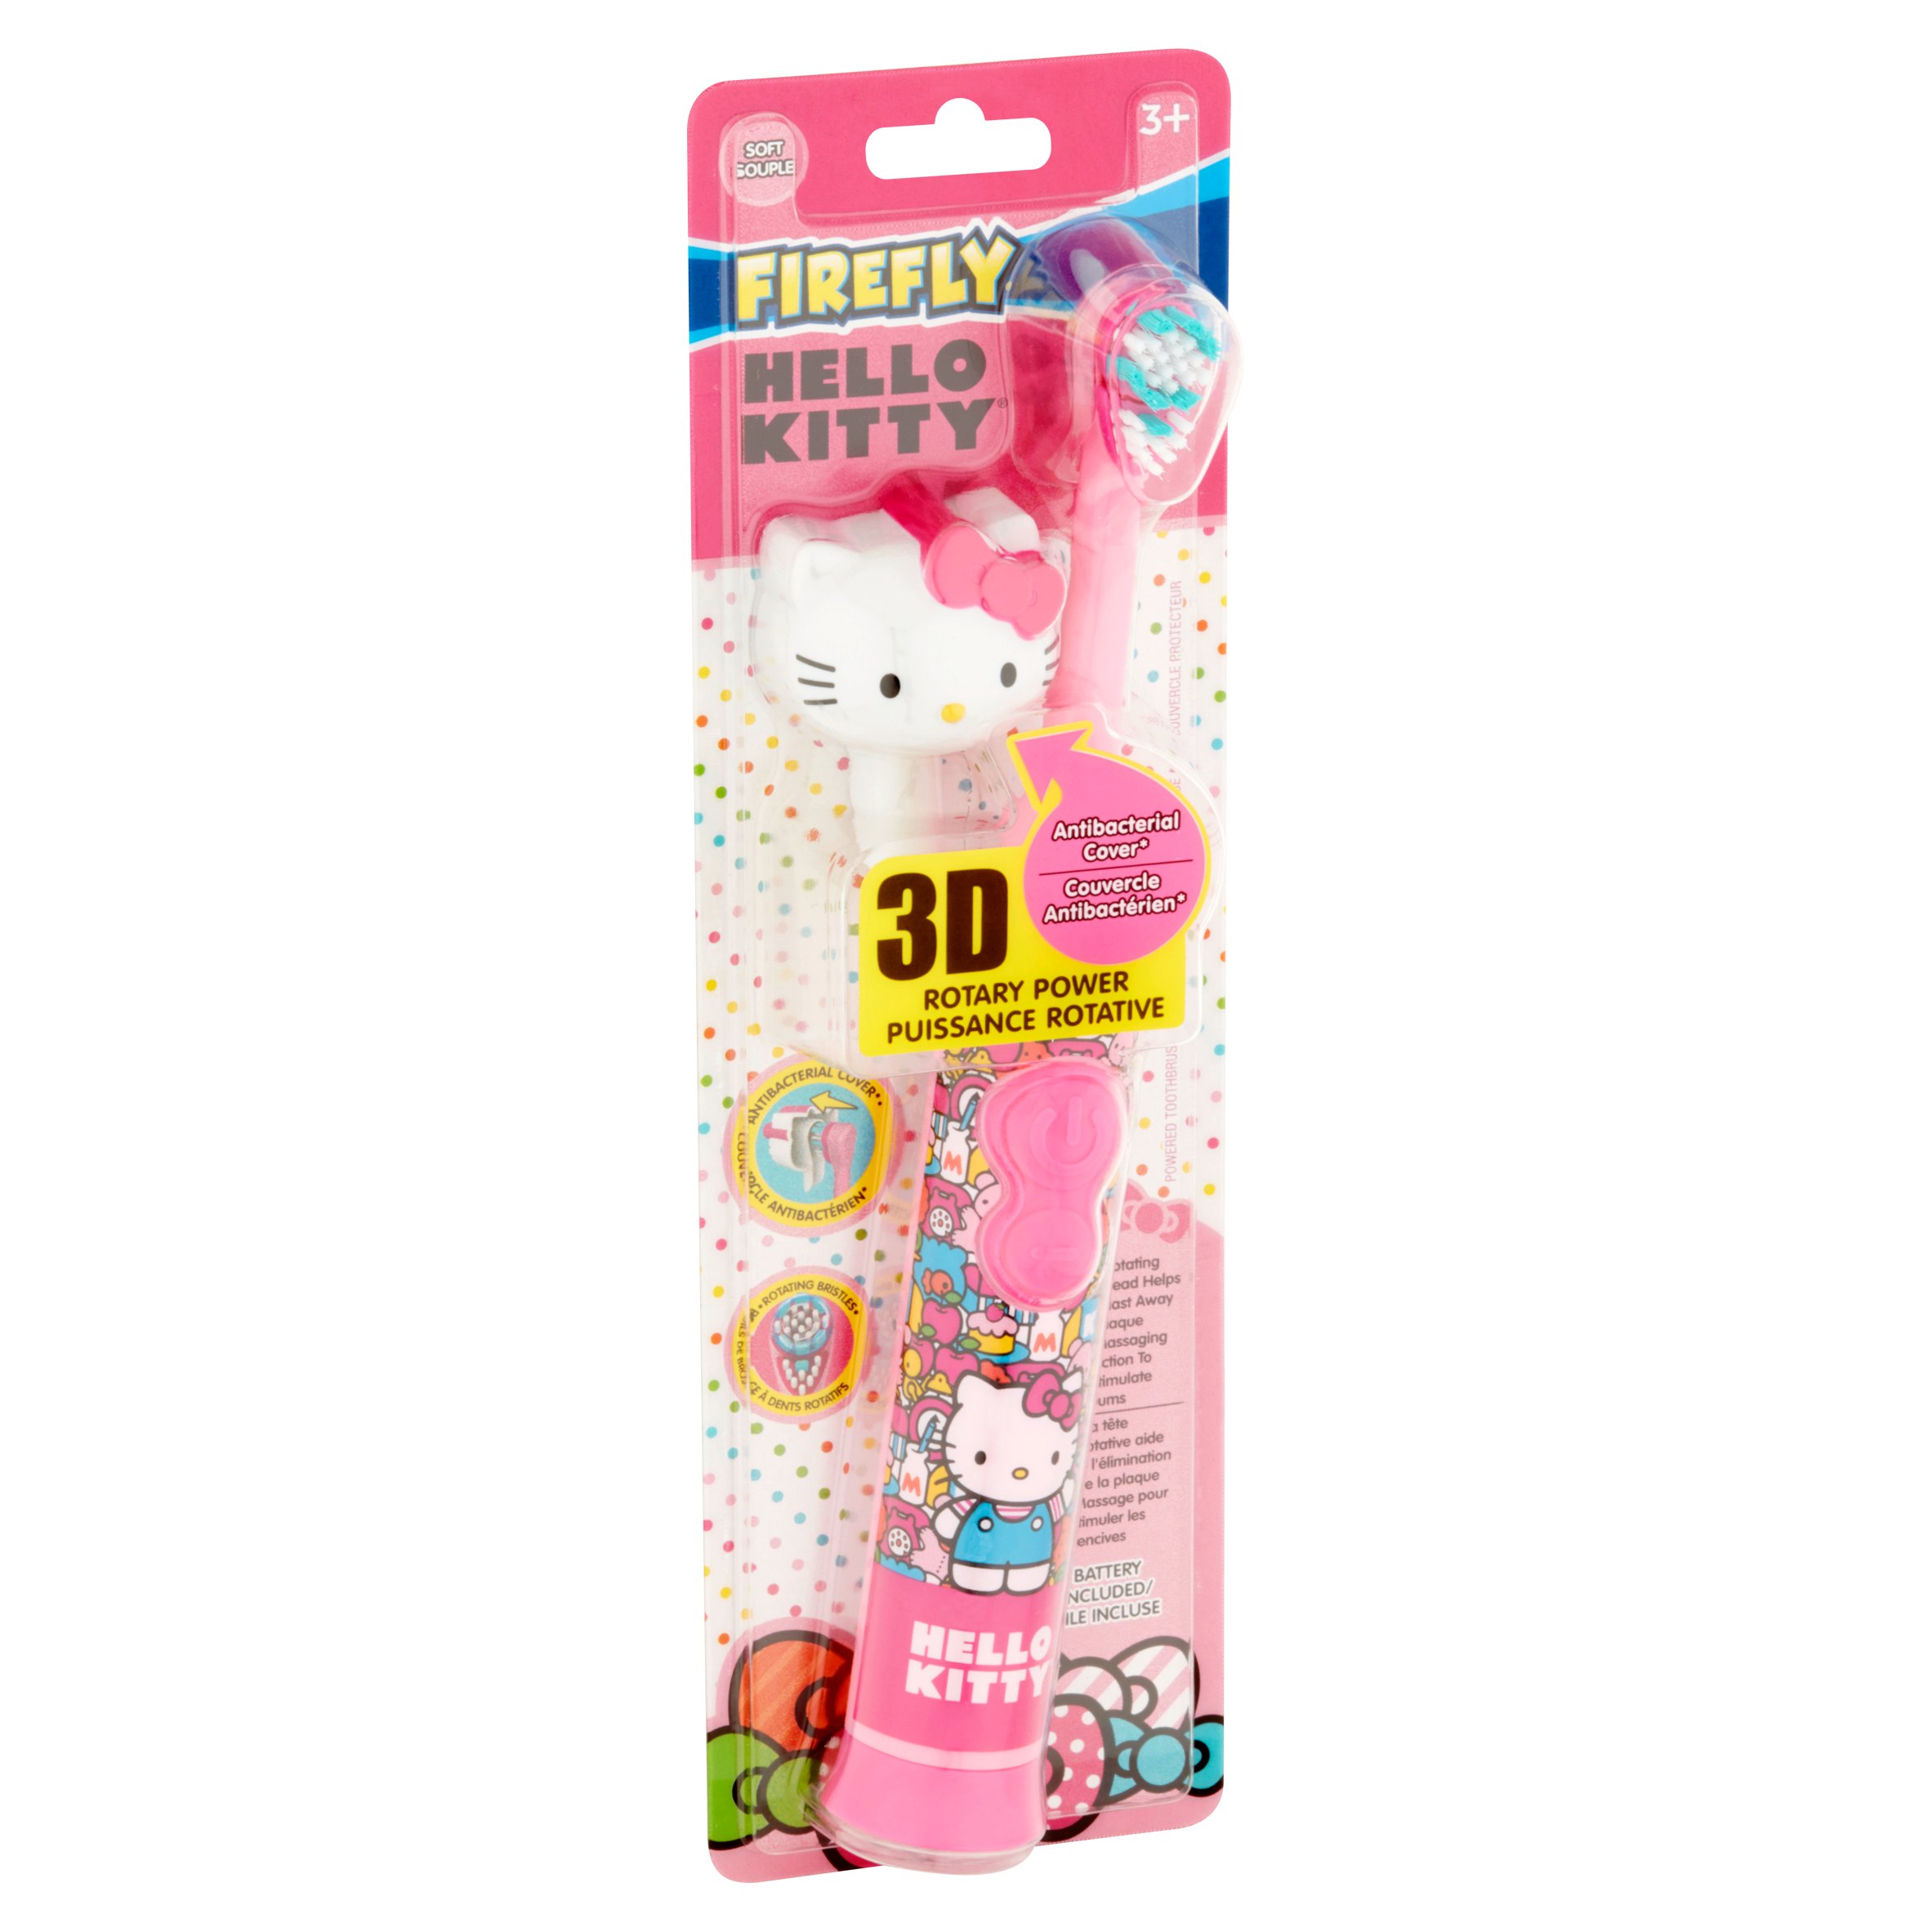 Firefly Hello Kitty Power Toothbrush with Cover, Battery Included, Ages 3+ - image 2 of 10